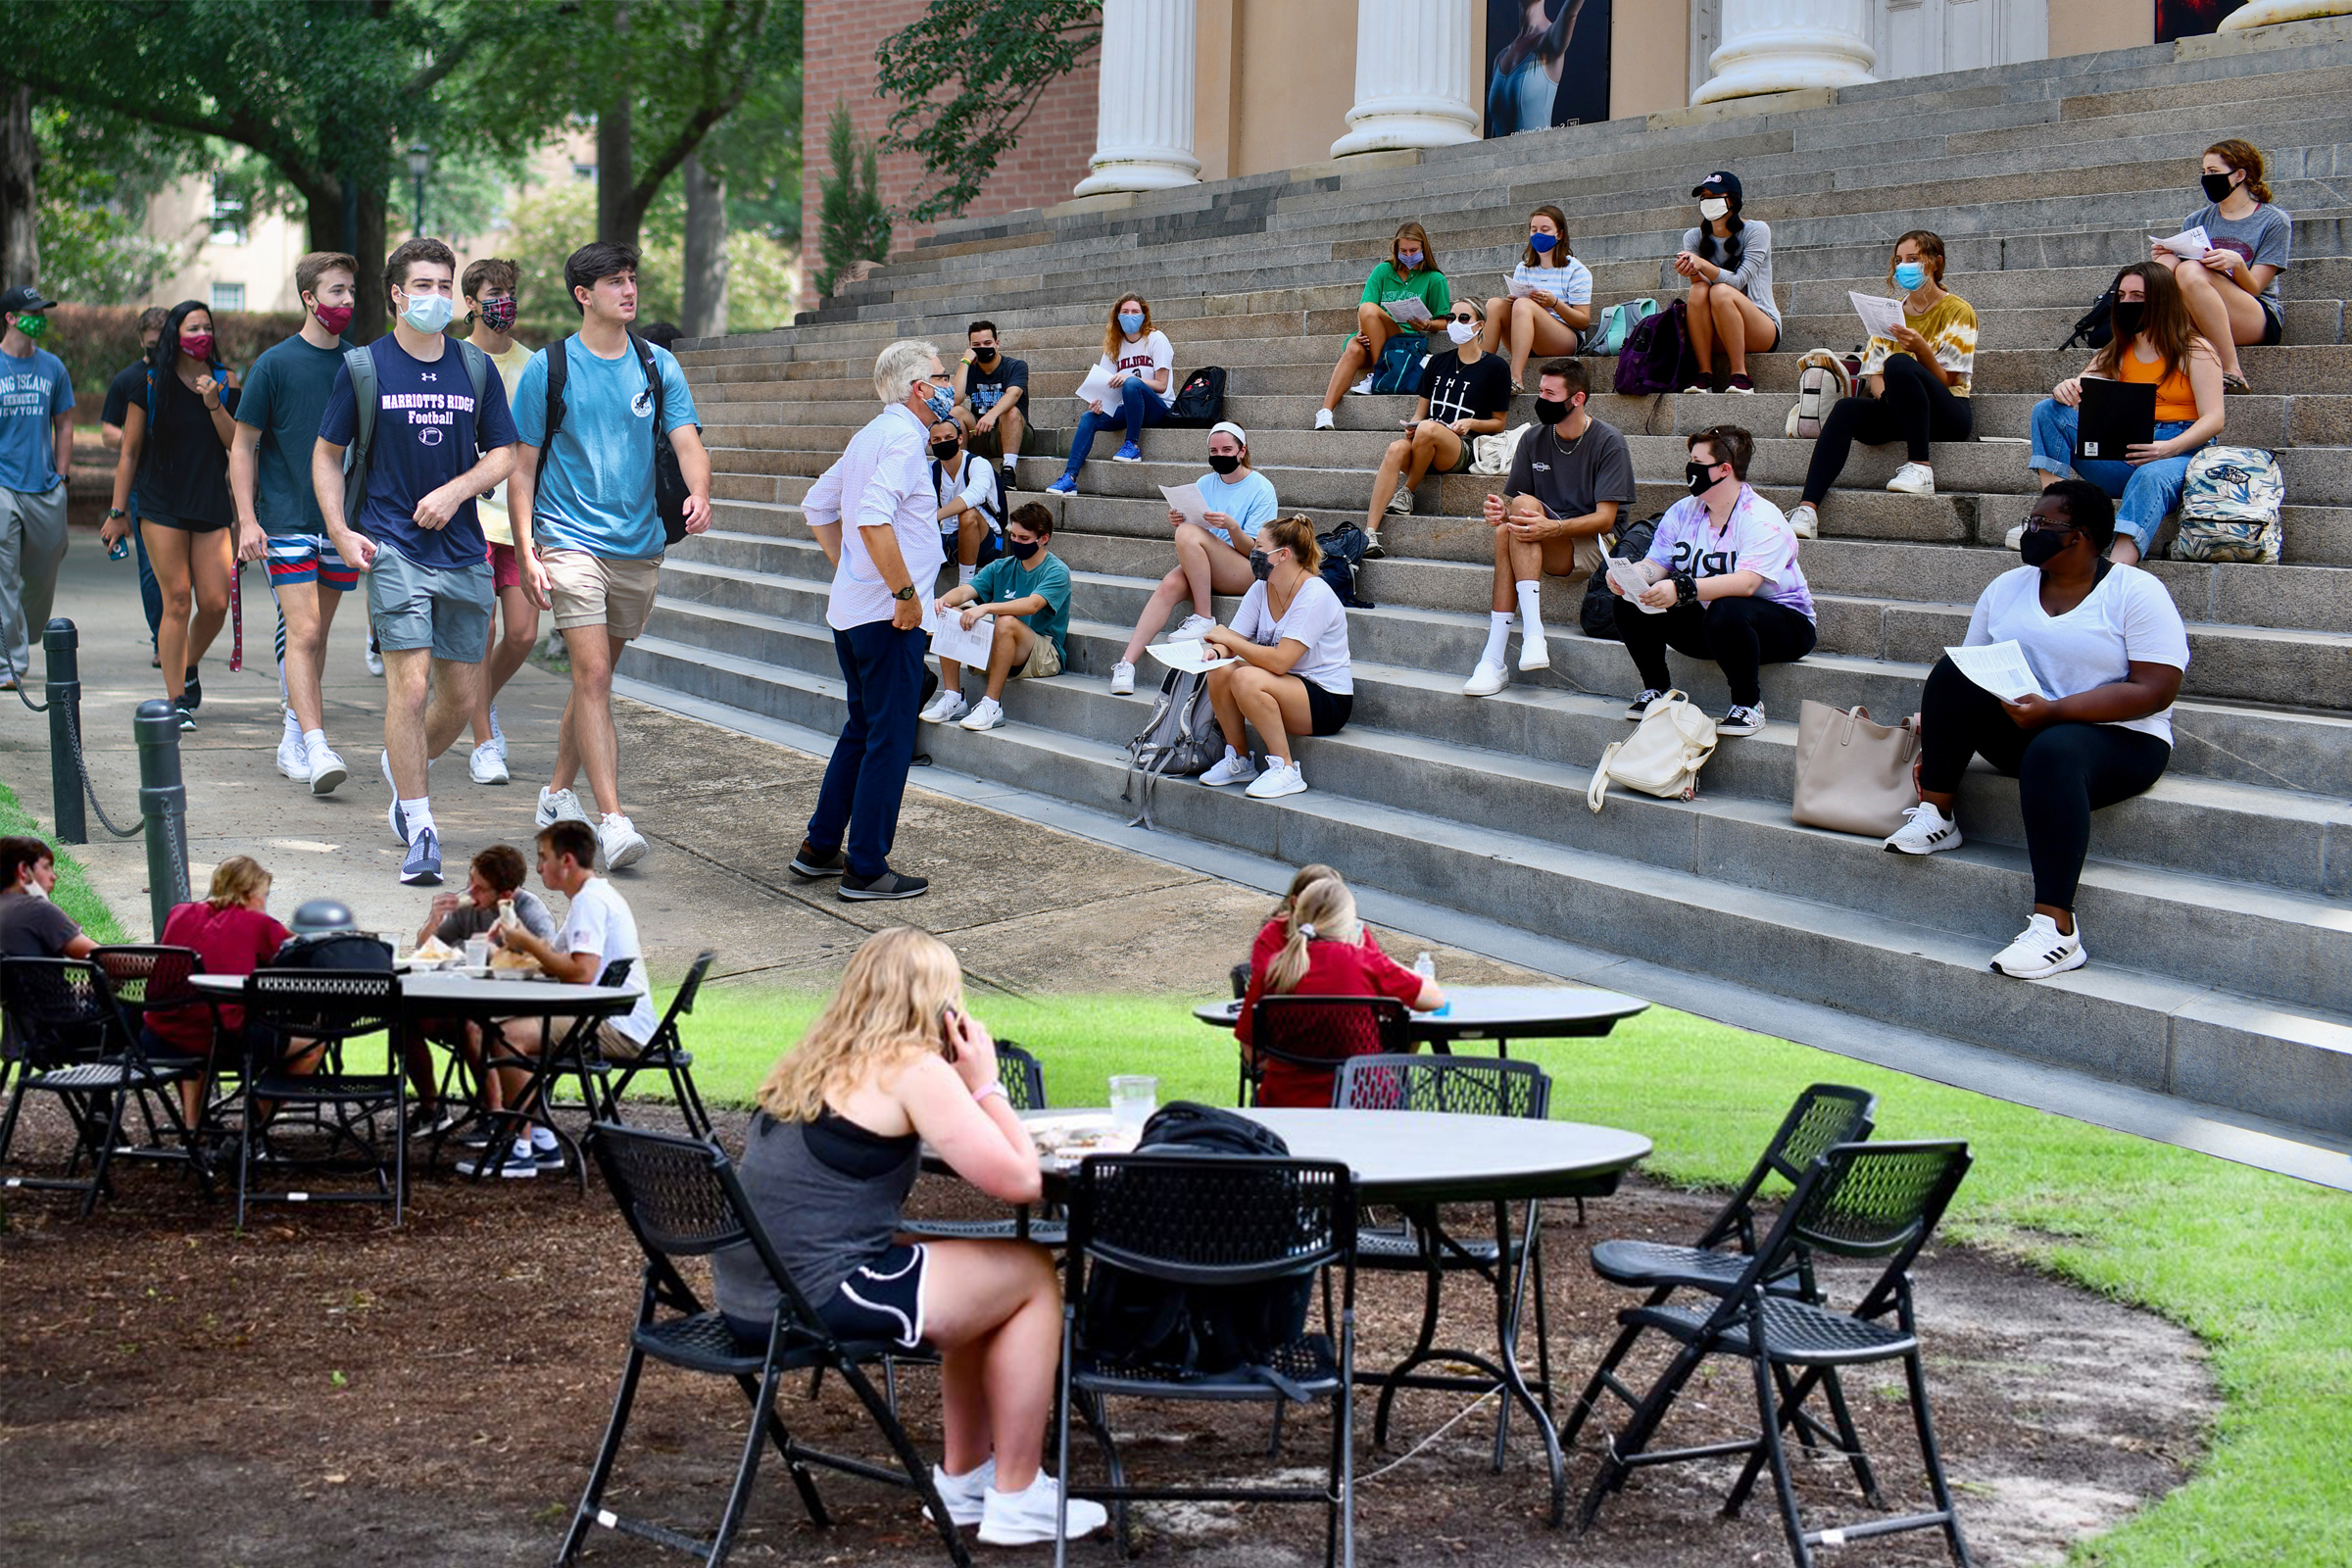 From top left: Students walking around Russell House, University of South Carolina’s student union; A professor holds class outside on the steps of Longstreet Theatre on USC’s campus; USC put tables and chairs on the grass around the student union so there is more seating area because indoor capacity is limited. Students are expected to wipe down these tables and chairs themselves upon use (Photo-Illustration by TIME; Courtesy The Daily Gamecock (3))